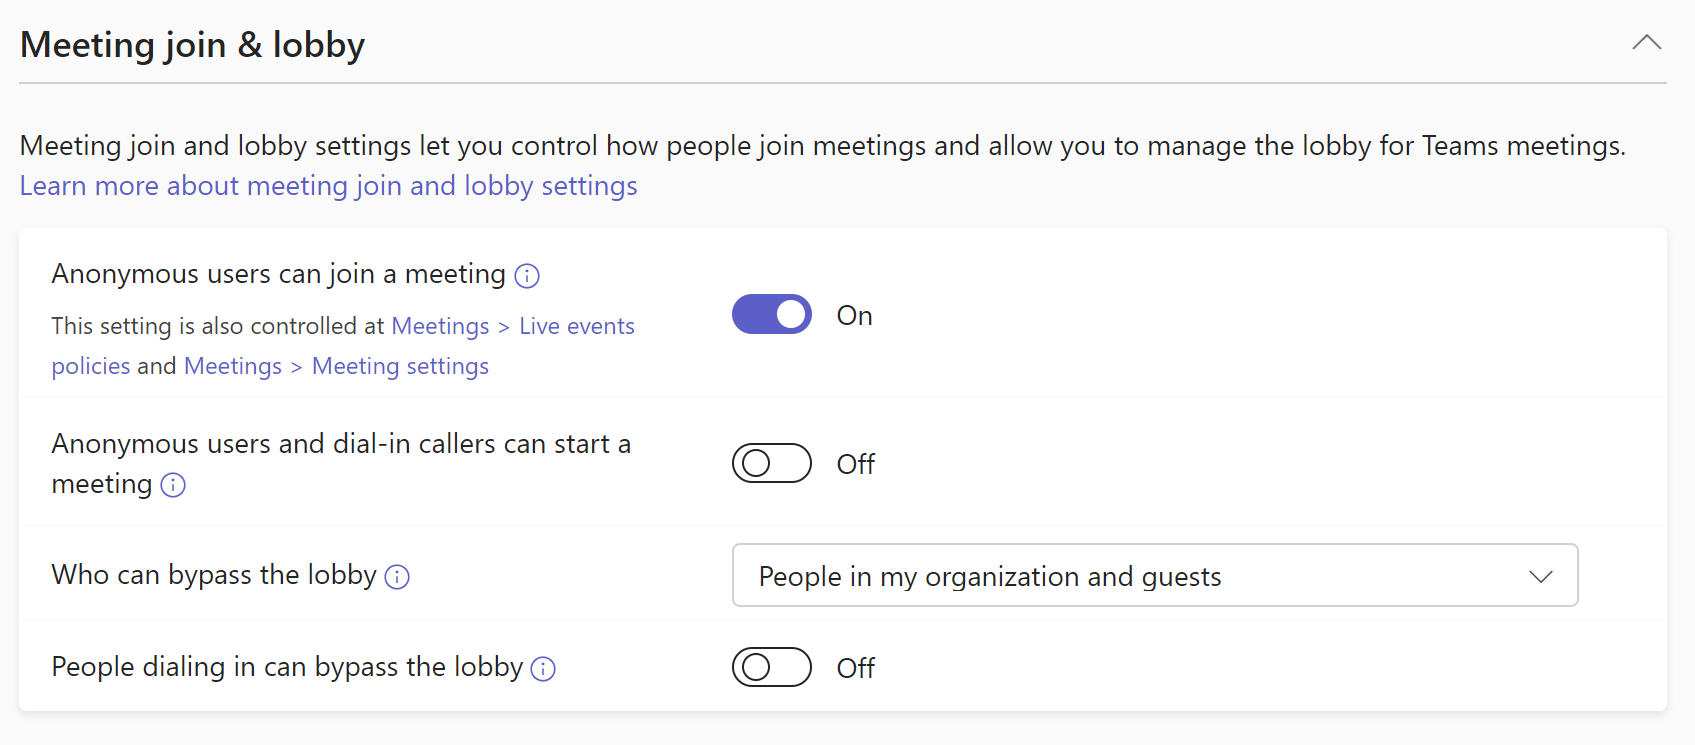 Screenshot of Meeting join and lobby settings in meeting policy.